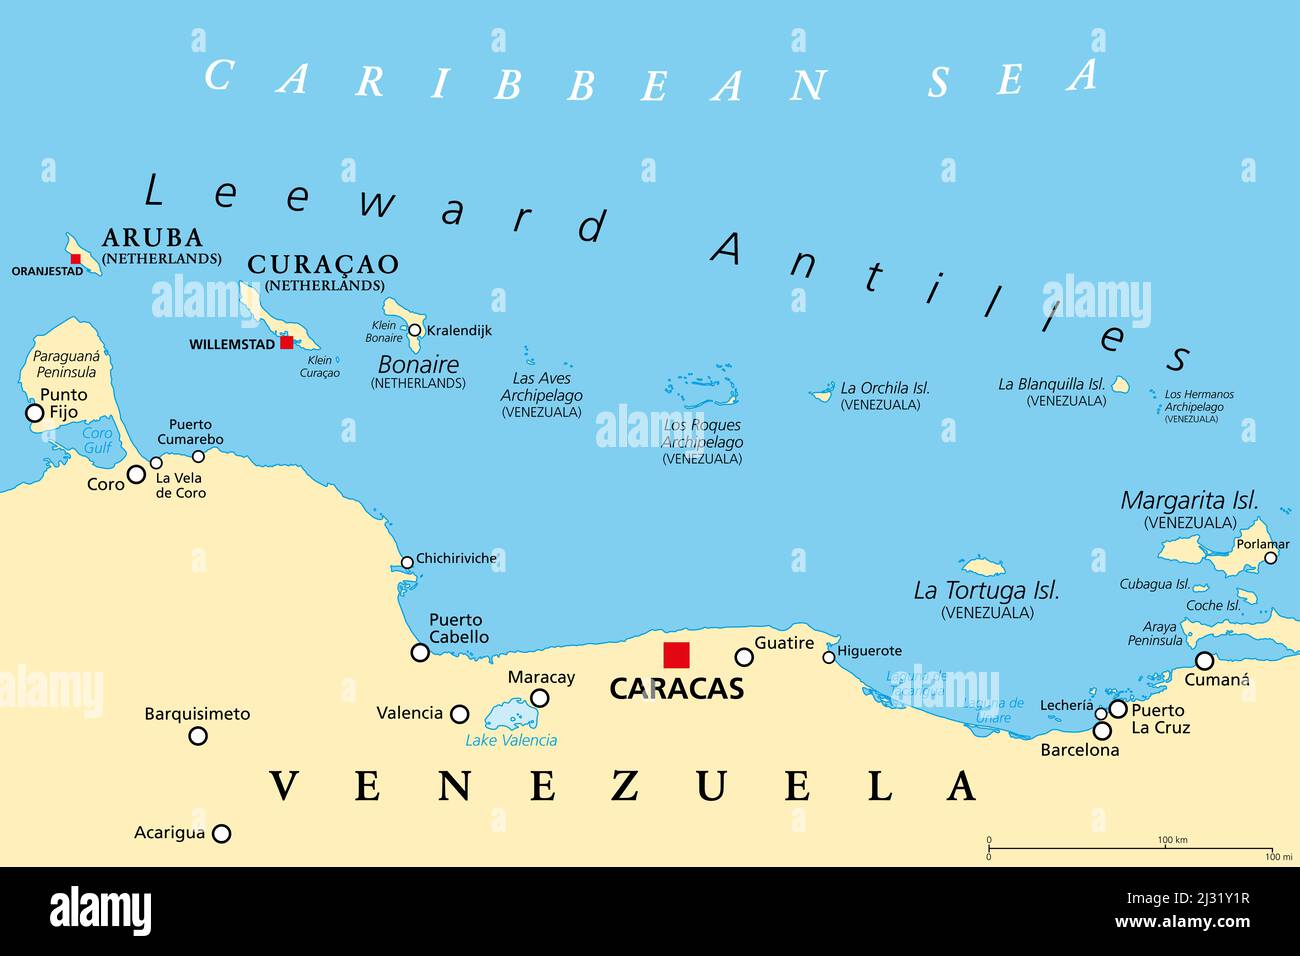 Leeward Antilles political map. Chain of islands in the Caribbean. From  Aruba, Curacao and Bonaire to La Tortuga and Margarita Island Stock Photo -  Alamy